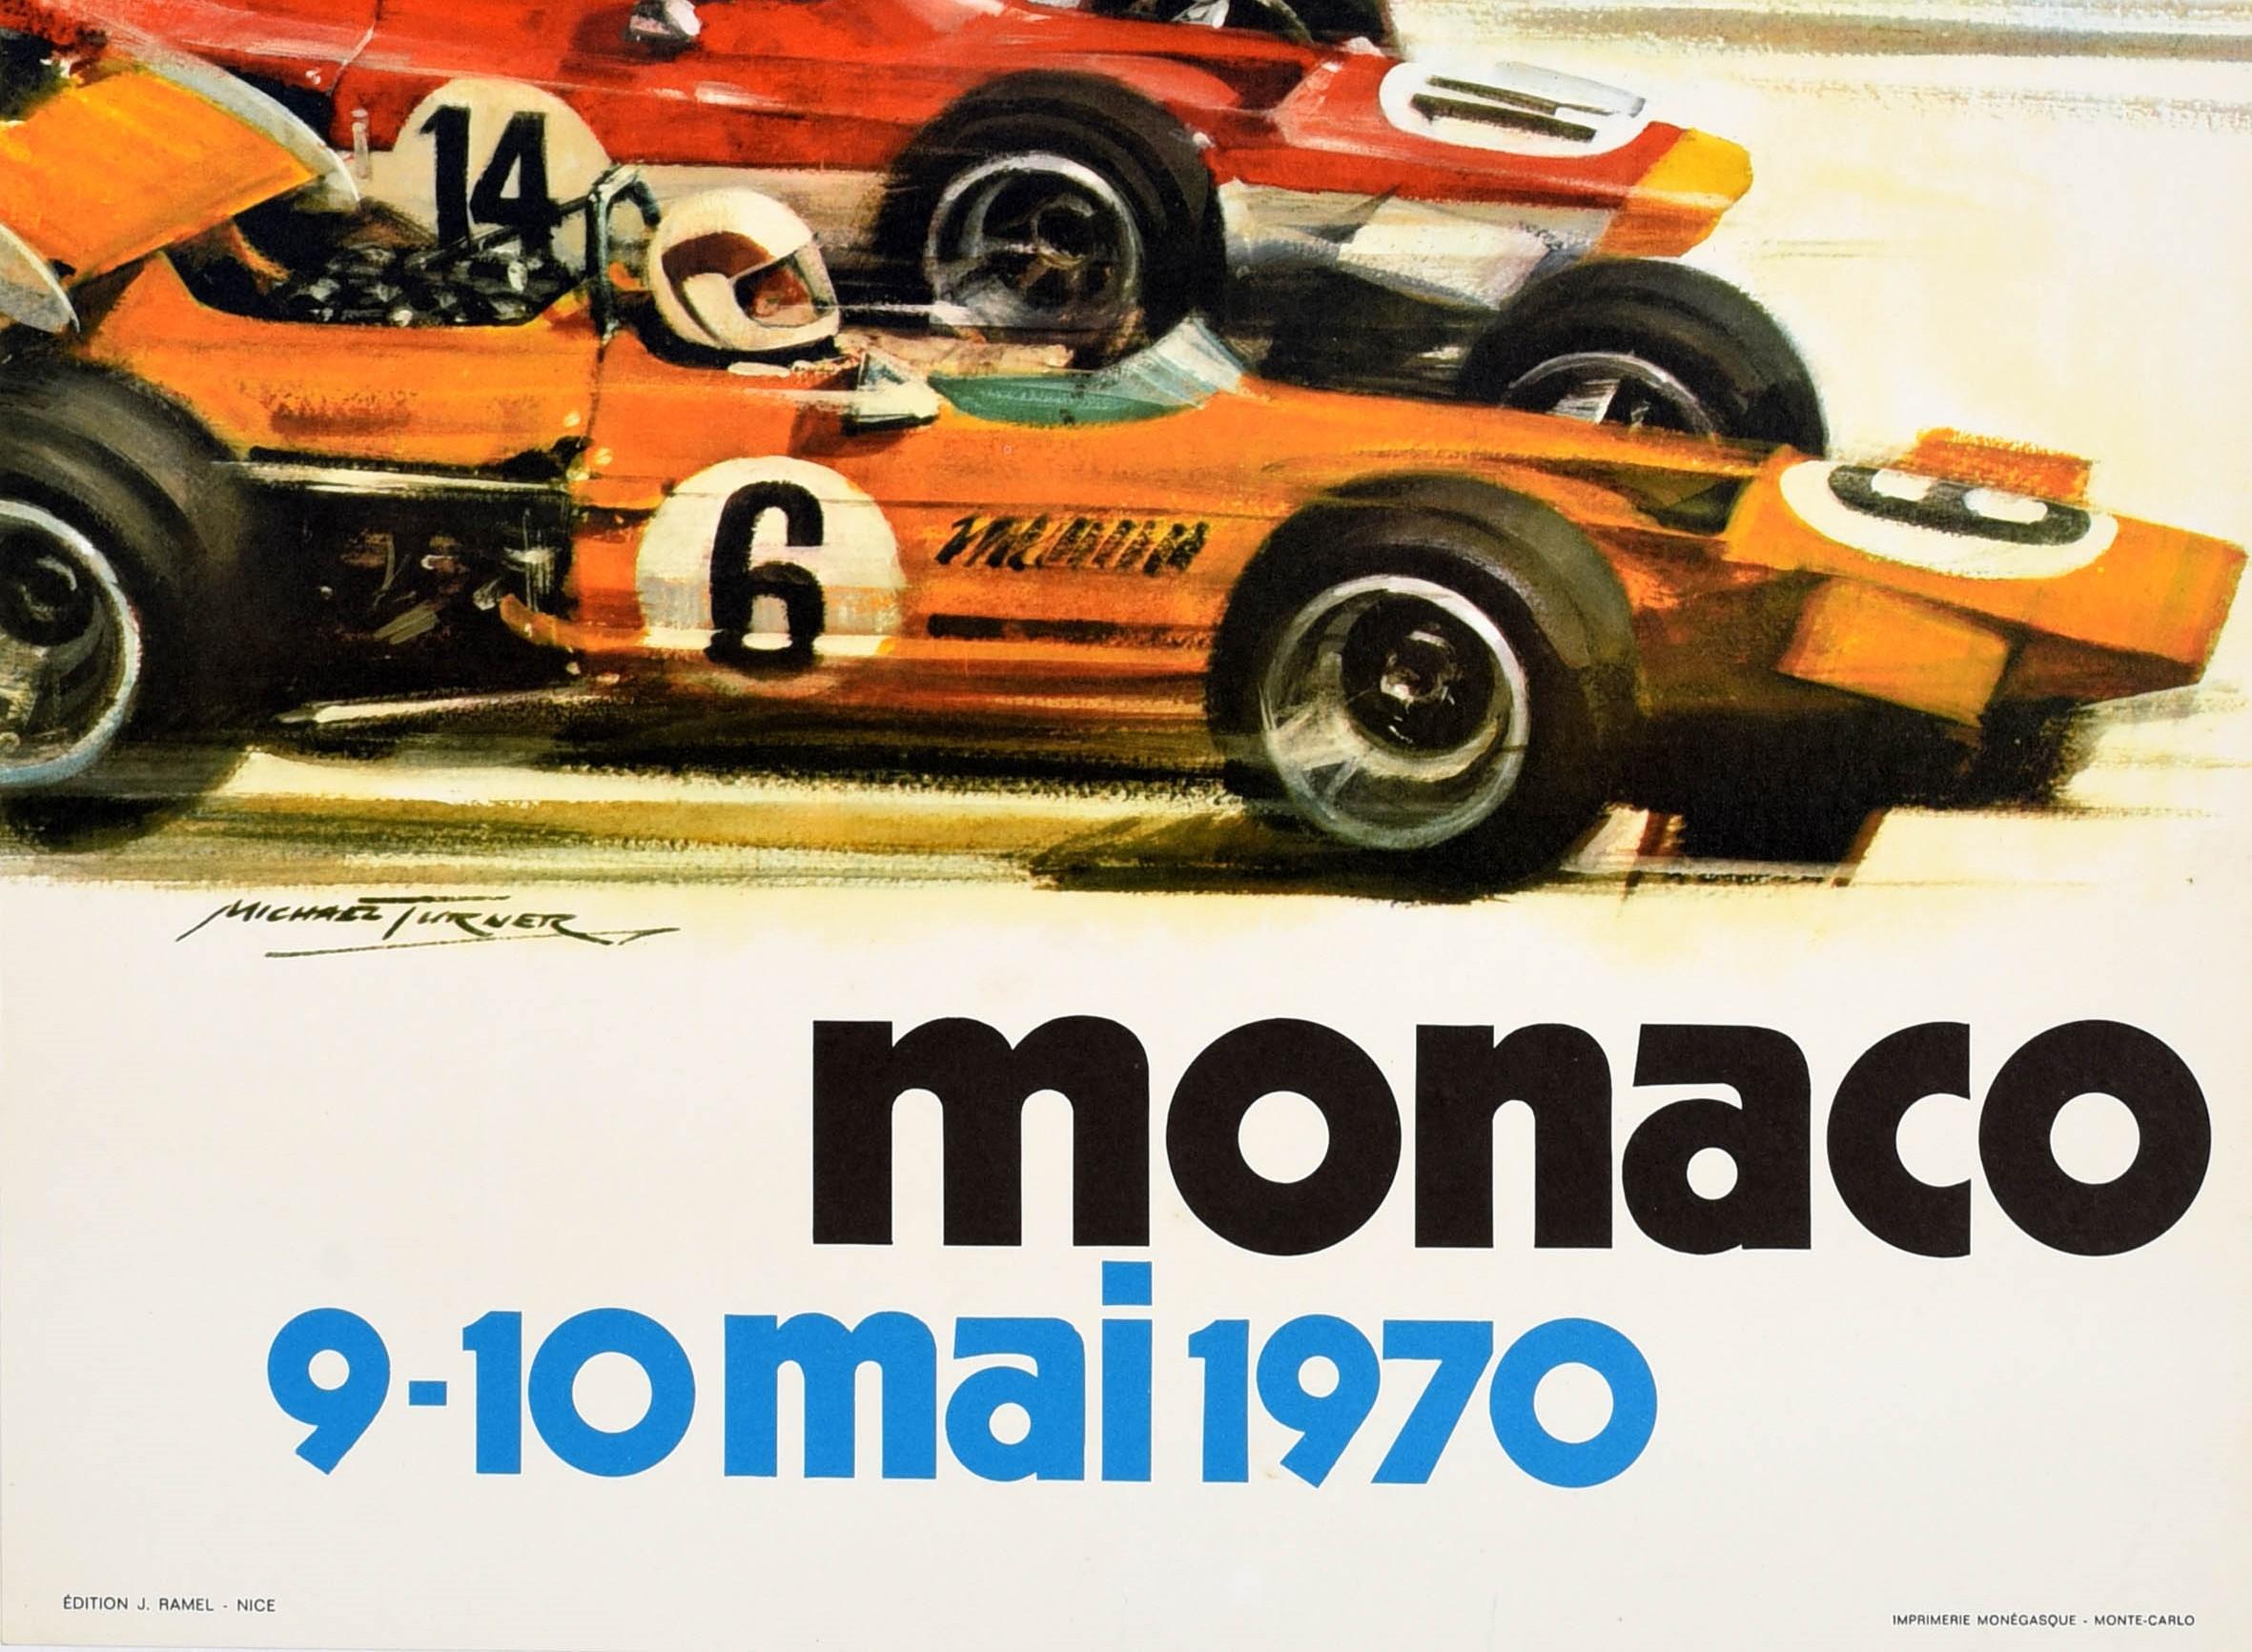 Original vintage sport poster for the Monaco Grand Prix 9-10 May 1970 featuring a dynamic illustration of two formula one cars racing on a road alongside a sailing boat on the water with a lighthouse and buildings on the hillside in the background.